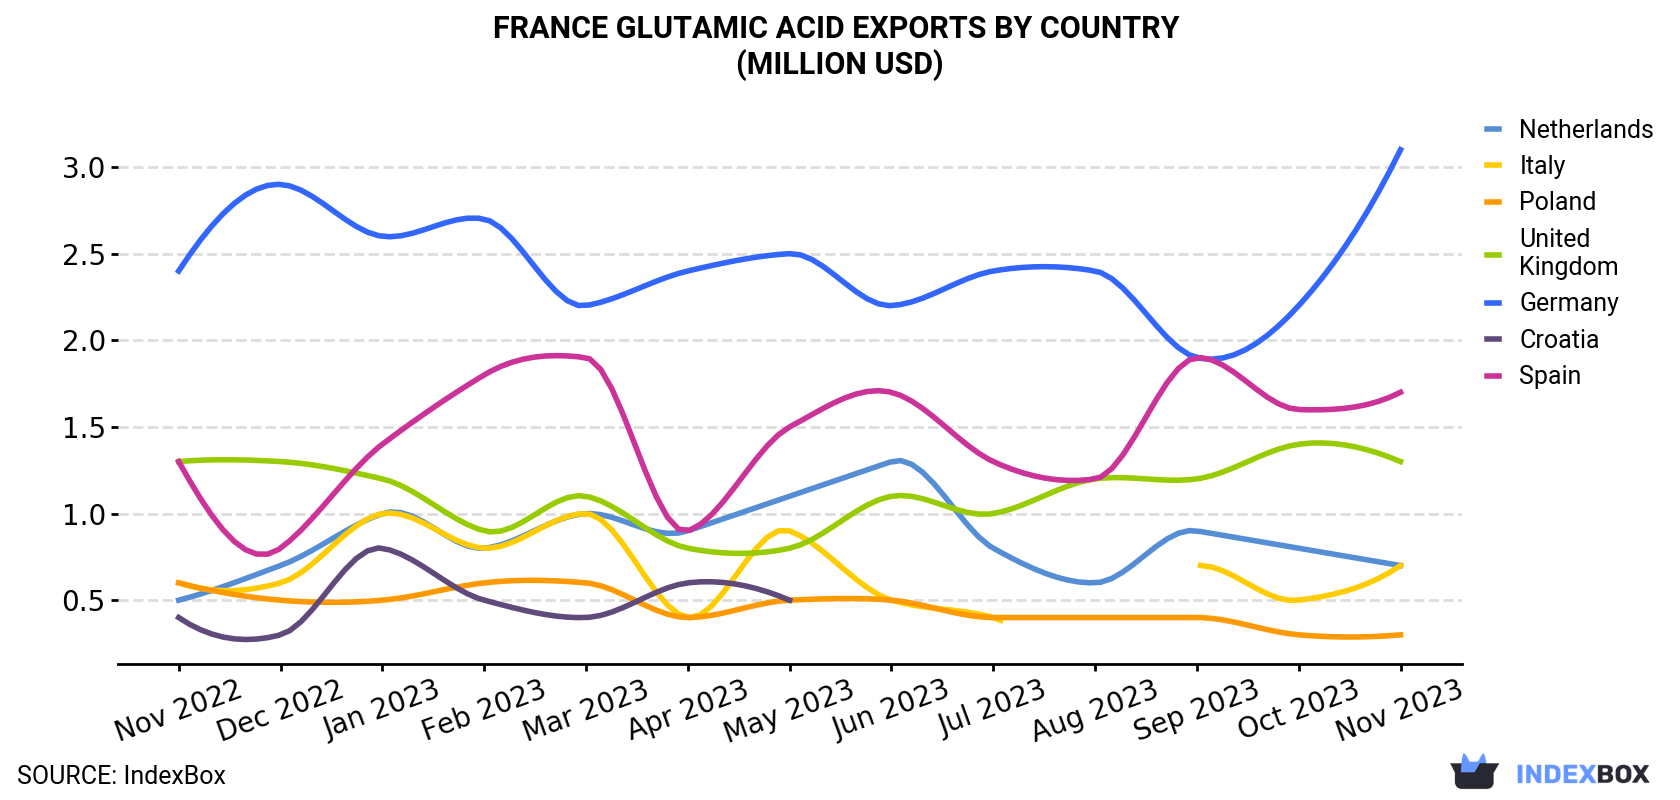 France Glutamic Acid Exports By Country (Million USD)